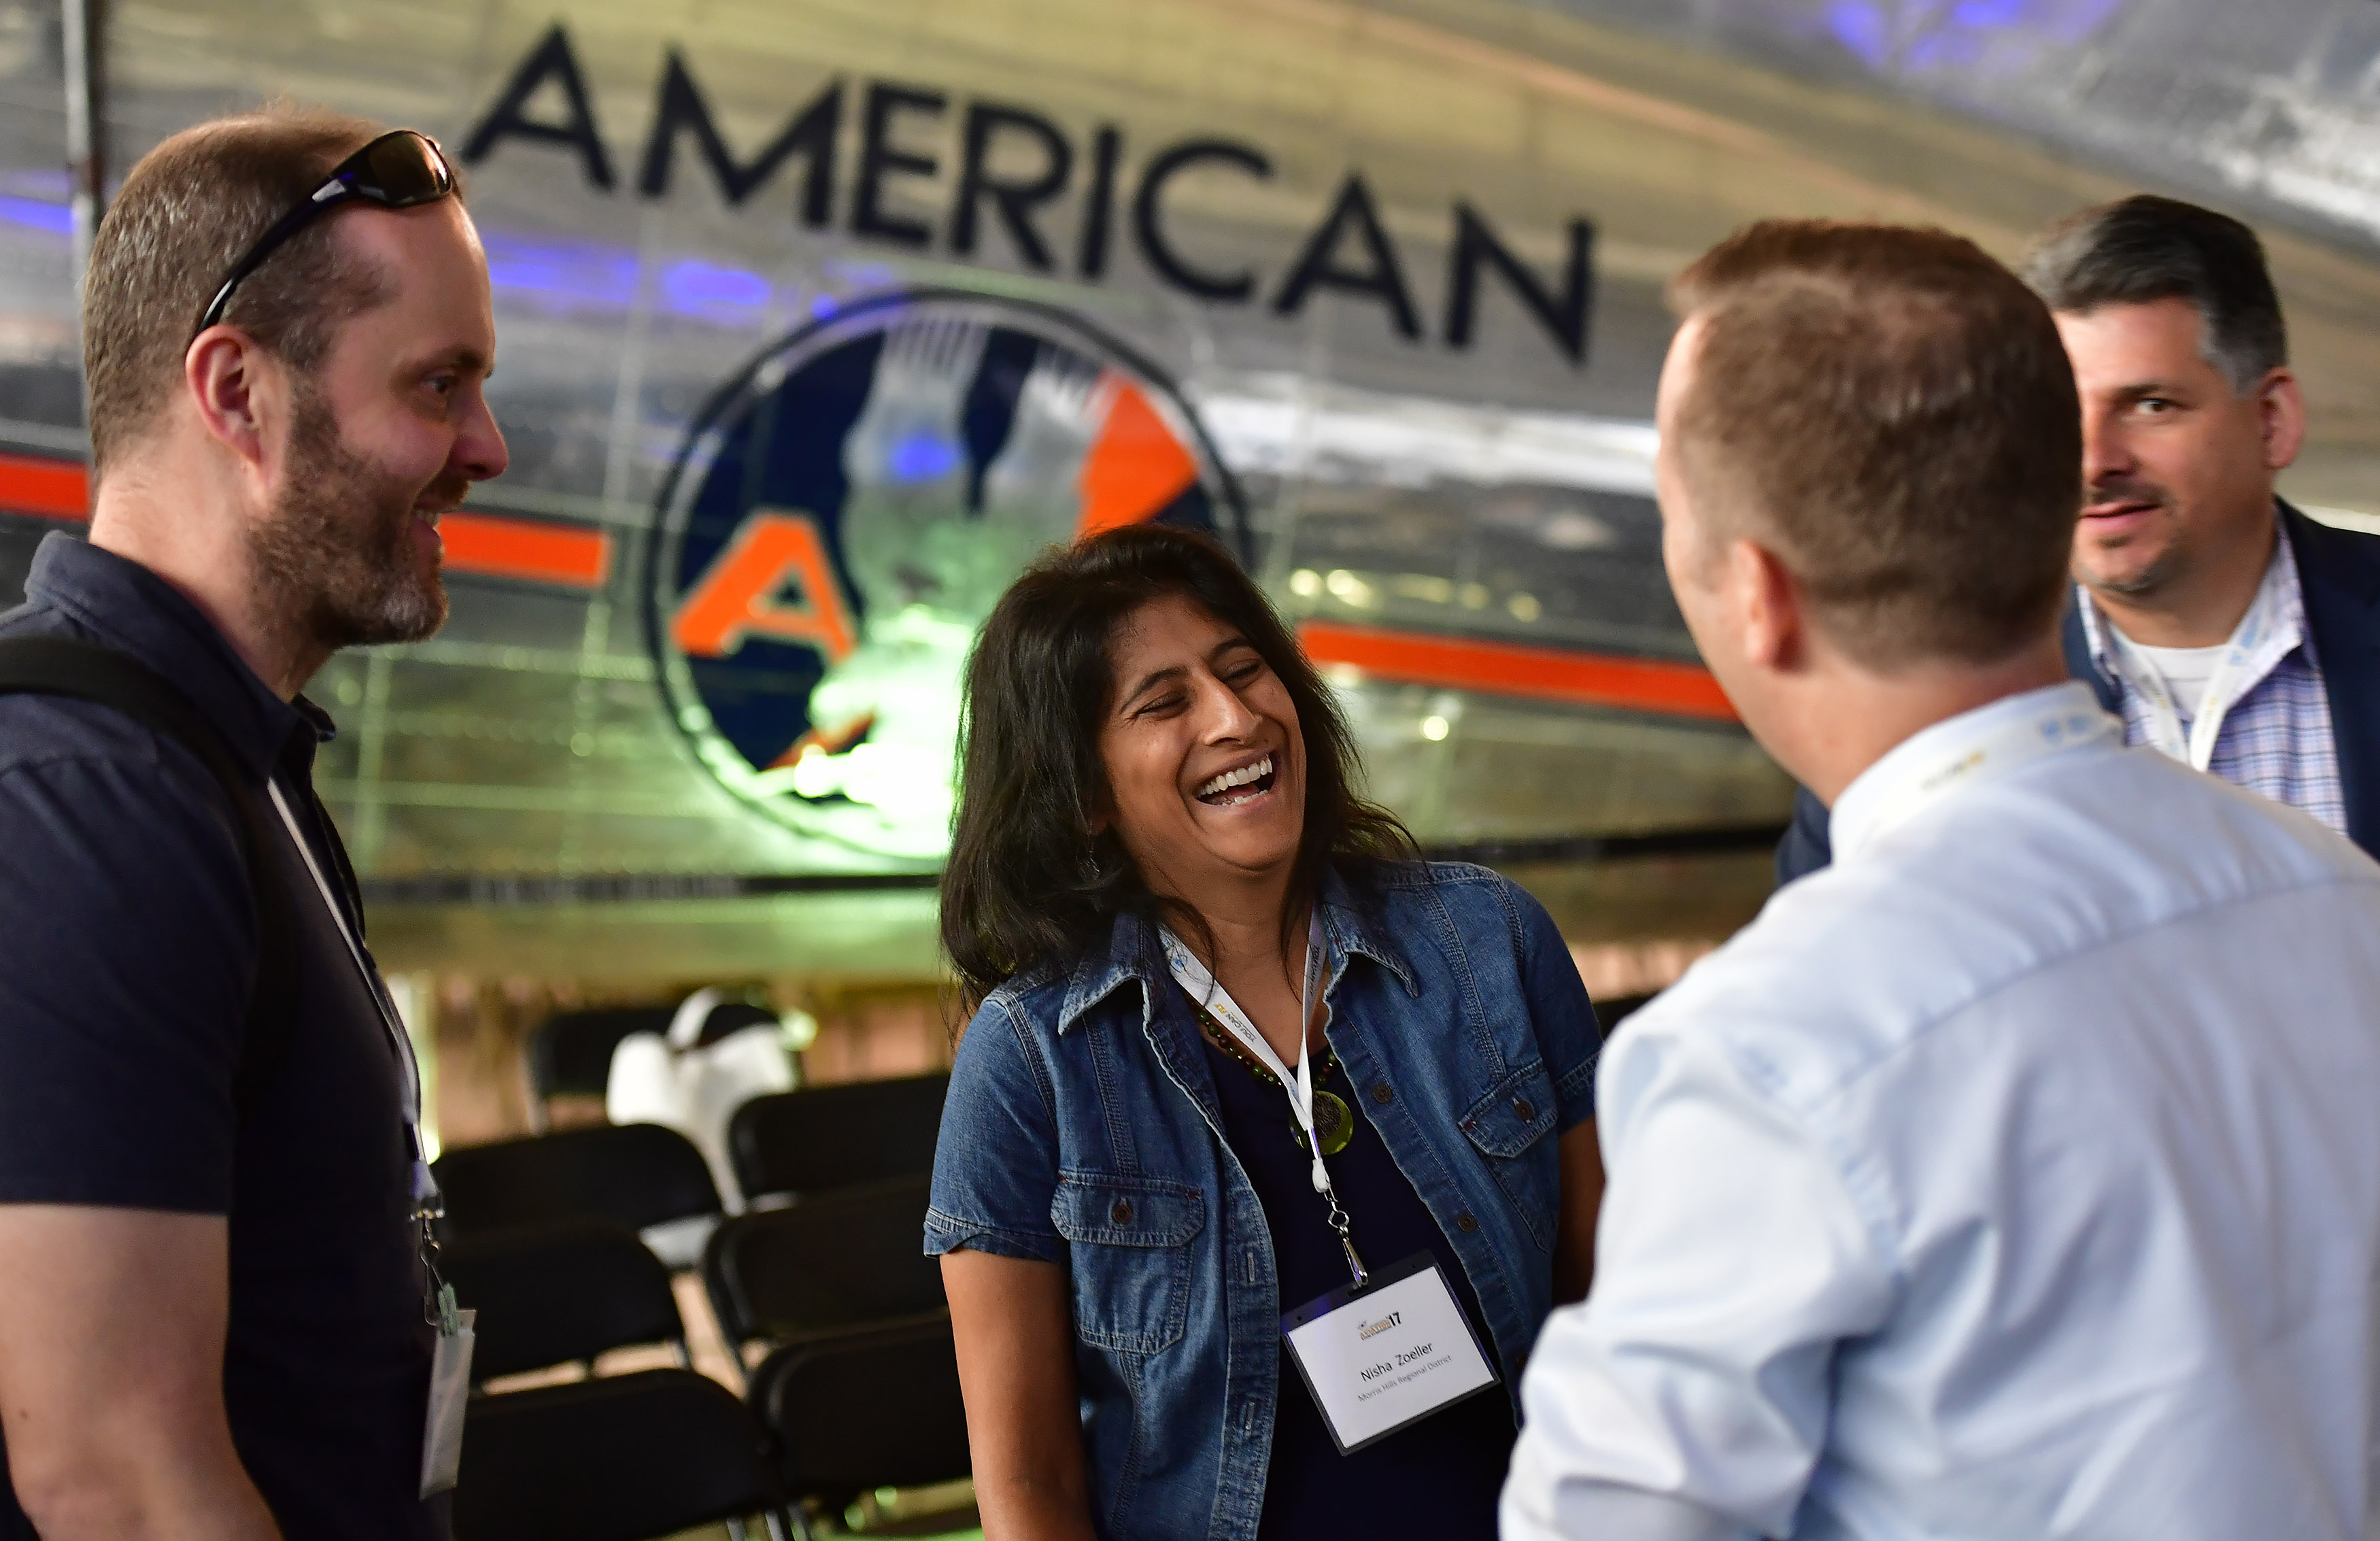 Morris Hills Regional District Assistant Superintendent Nisha Zoeller, of New Jersey, greets friends during the AOPA High School Aviation STEM Symposium at American Airlines C.R. Smith Museum in Forth Worth, Texas, Nov. 6. Photo by David Tulis.